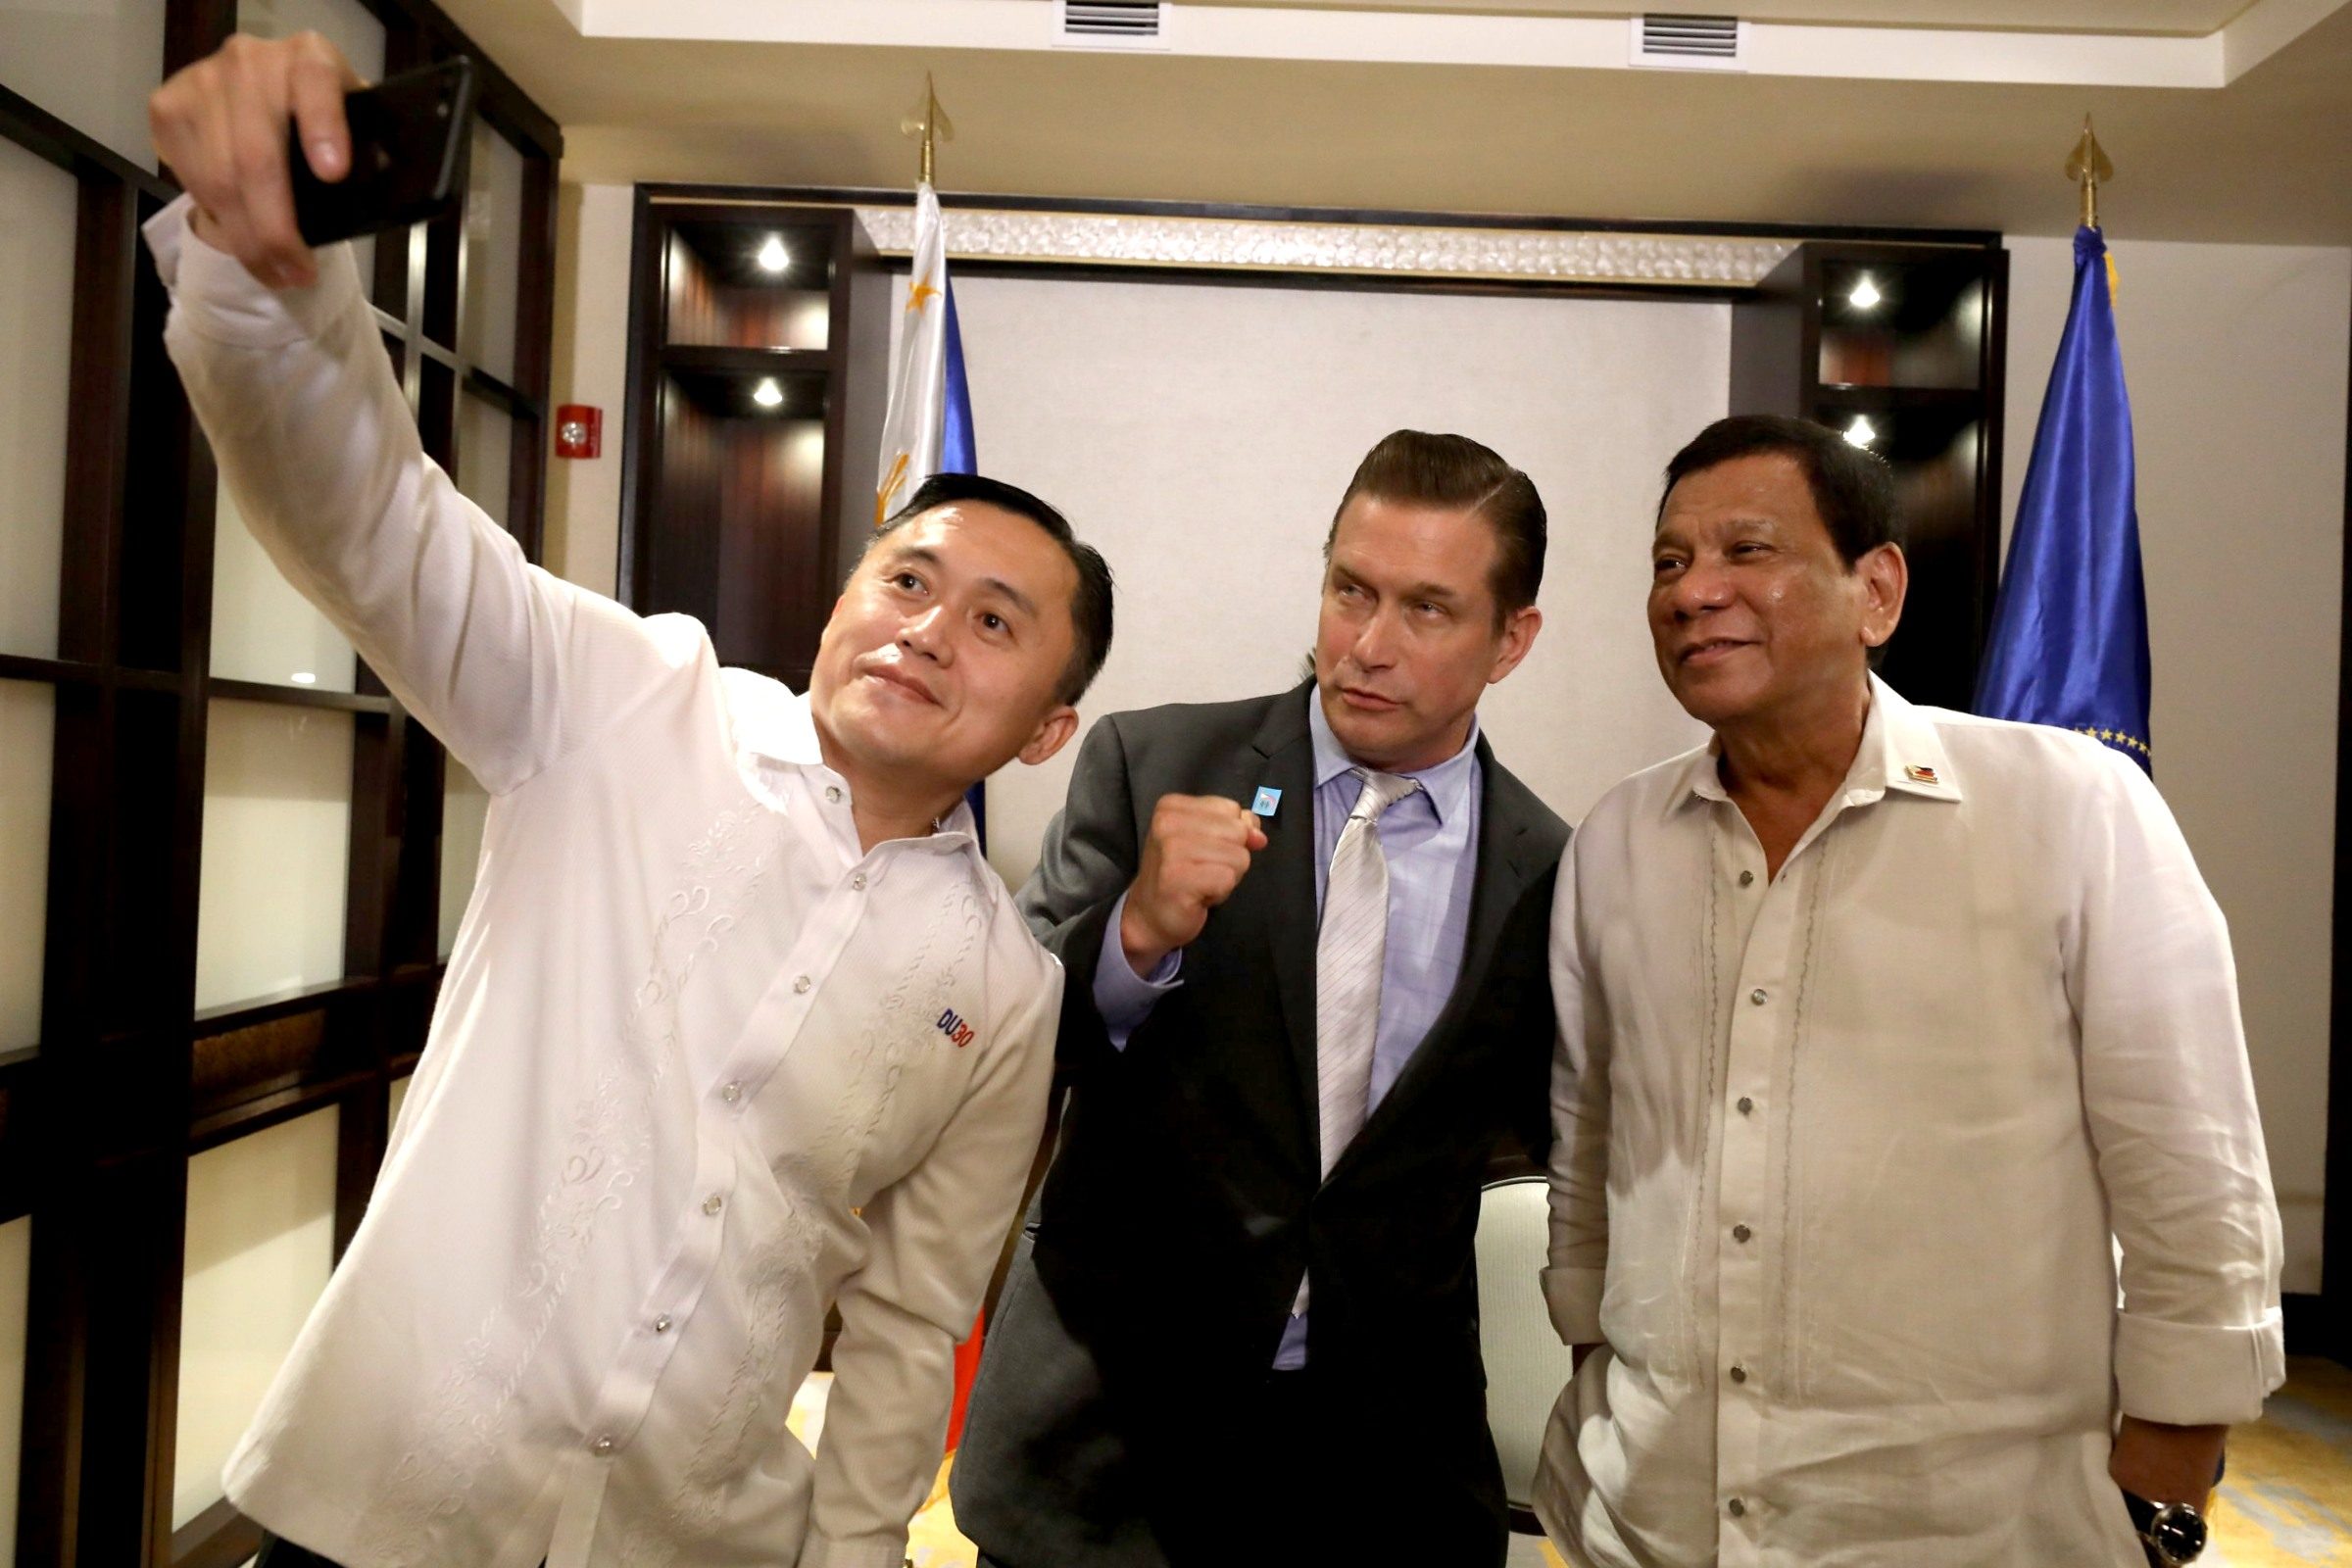 GOVERNMENT AND SHOWBIZ. President Rodrigo Duterte poses for a photo with Hollywood actor Stephen Baldwin, and Special Assistant to the President Bong Go in Taguig City on August 1, 2018. Malacañang photo
  